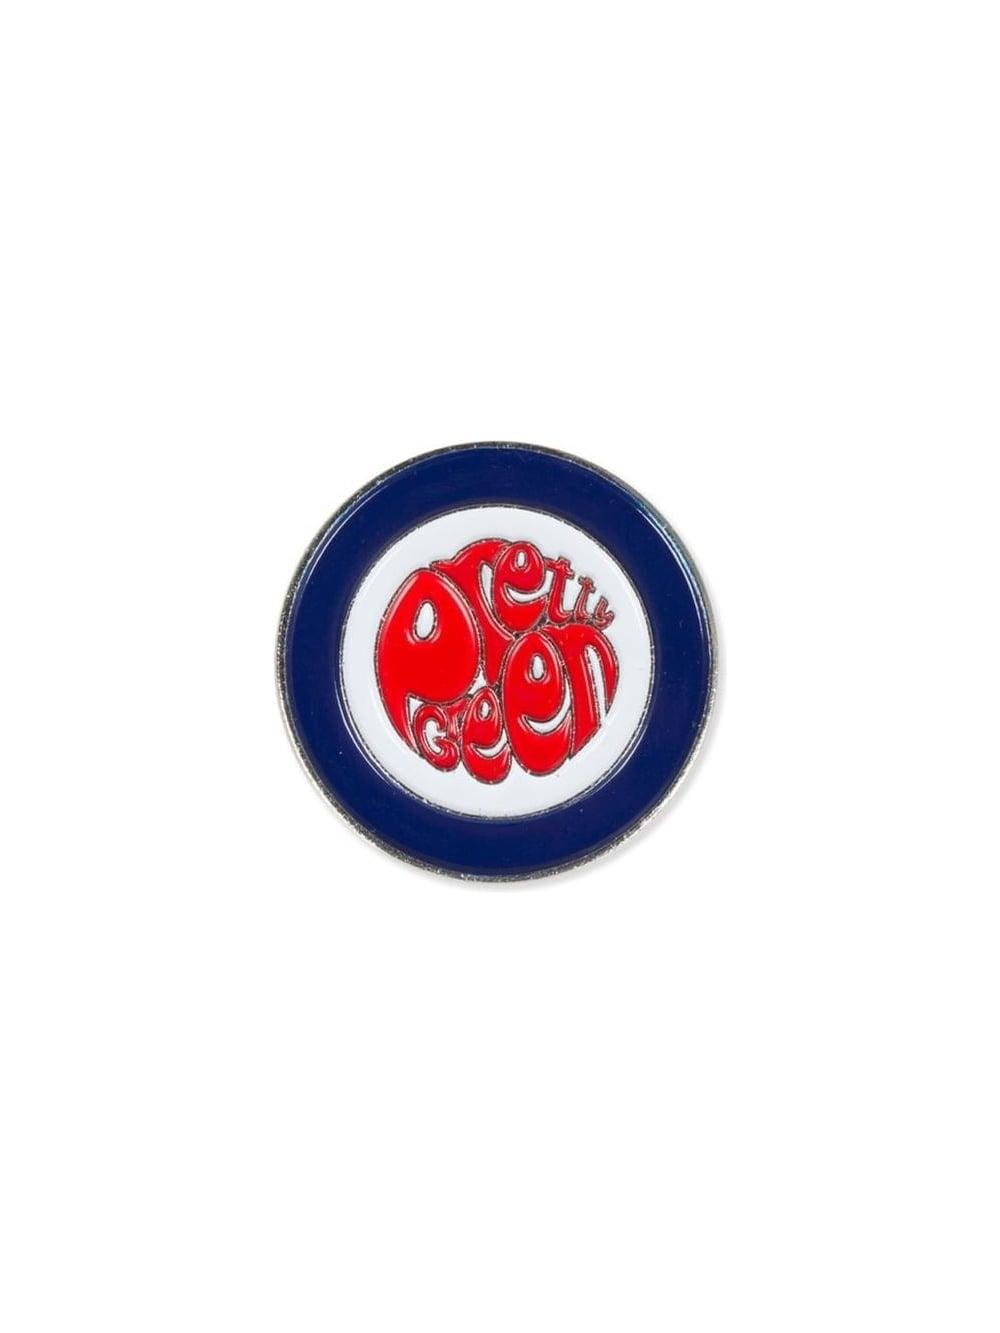 Green and Red Co Logo - Pretty Green Target Pin Badge in Red - Northern Threads